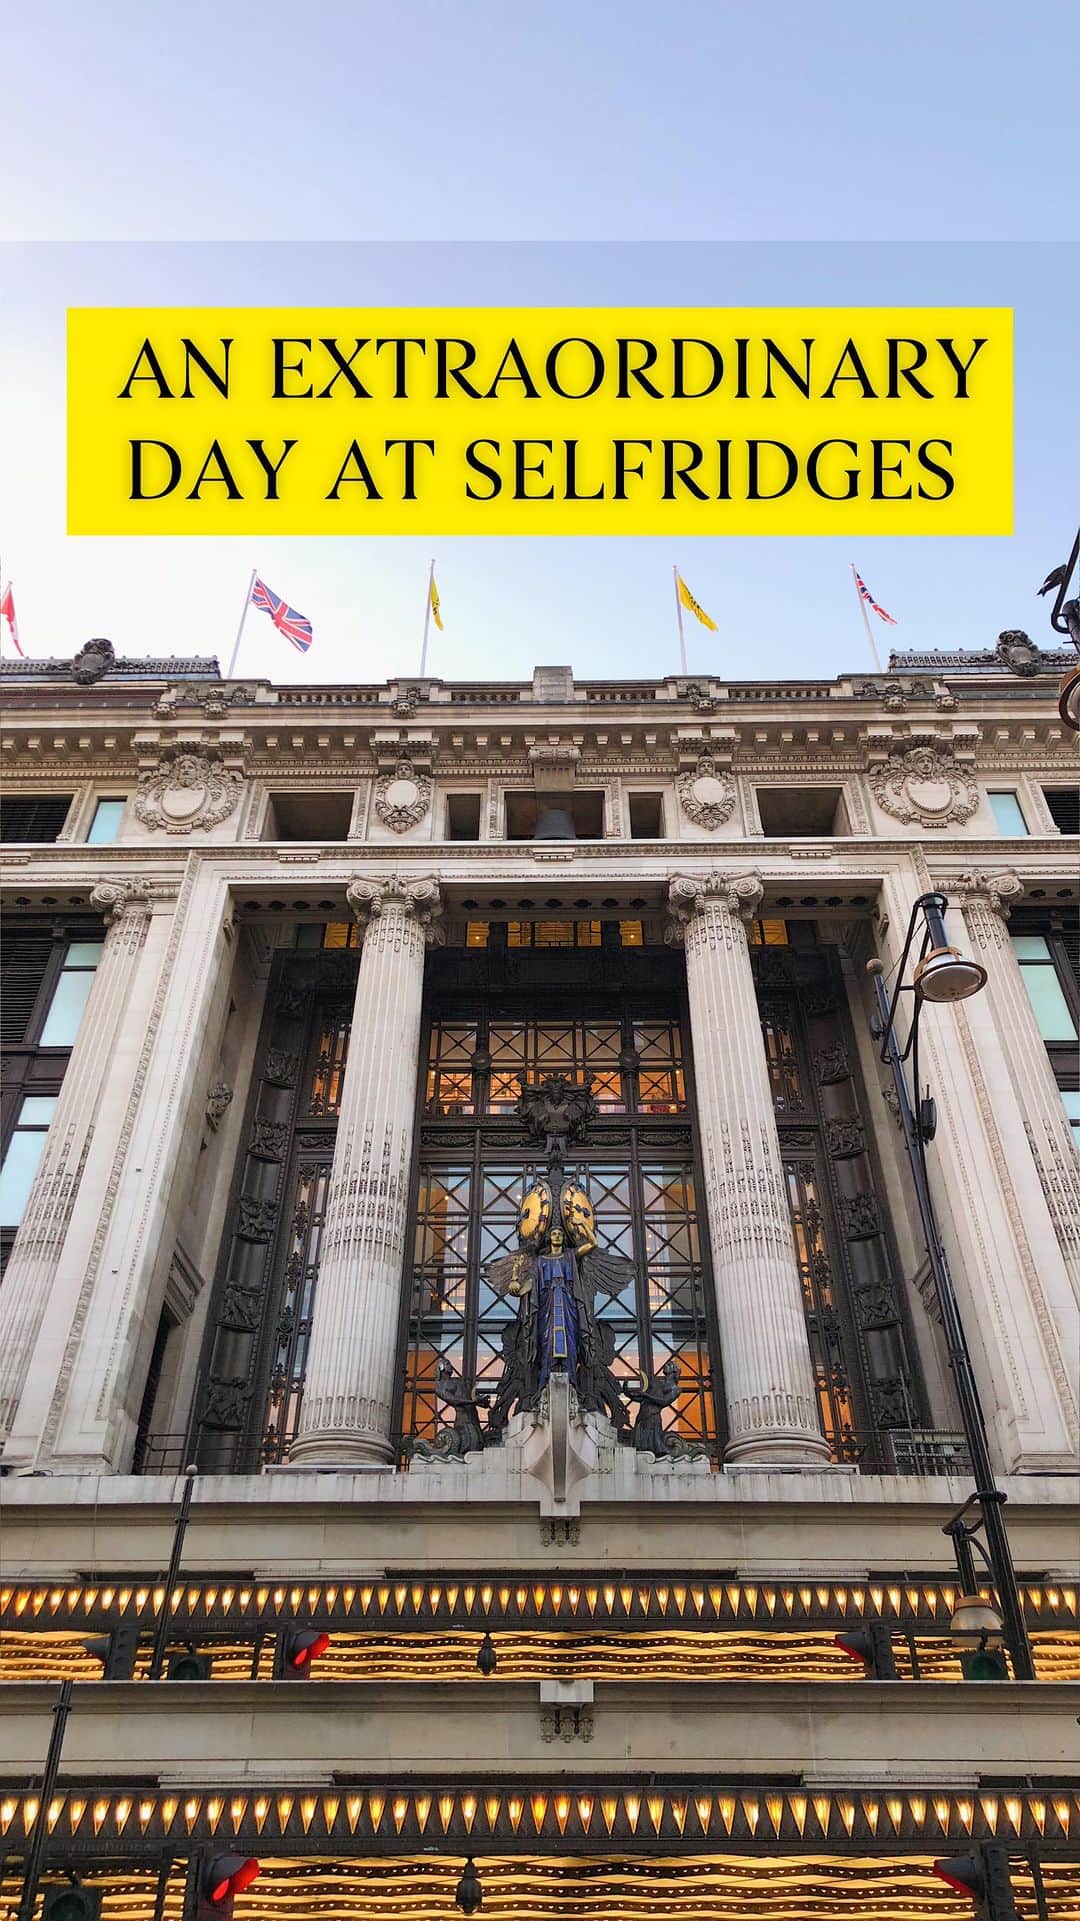 @LONDON | TAG #THISISLONDONのインスタグラム：「ad 🔑 We’re super excited to become Selfridges Unlocked key holders! 🎉 @TheOfficialSelfridges everyone’s welcome to sign up at www.Selfridges.com!  at www.Selfridges.com💛 Scan your QR code as you shop, and as one of the perks every month you could win a whole day of extraordinary experiences! 🤯   How would you spend a perfect day out in #Selfridges?! This is what we did! 🙌🏼  1. @SneakersER 👟  2. @TheLightSalon 💡  3. BackRub ✨  4. @BobbiBrownUK 💄  5. @Alto_Selfridges 🍽️  6. @SelfridgesFood Hampers & Food Concierge 🧺  7. The Bowl 🛹  8. @GHDHair ✨  9. @BrasserieOfLight 10. The The Cinema at Selfridges at Selfridges🍿   When you use your key Selfridges will also donate to @CentrePointUK every time you spend, helping tackle youth homelessness. 🙏🏼❤️ @MrLondon & @Alice.Sampo ❤️  ___________________________________________  #thisislondon #lovelondon #london #londra #londonlife #londres #uk #visitlondon #british #🇬🇧 #whattodoinlondon #londonreviewed #londonshopping #londonfood #londonfoodies #londoncocktails #londonrestaurants #makeover #makeup #londonhair」